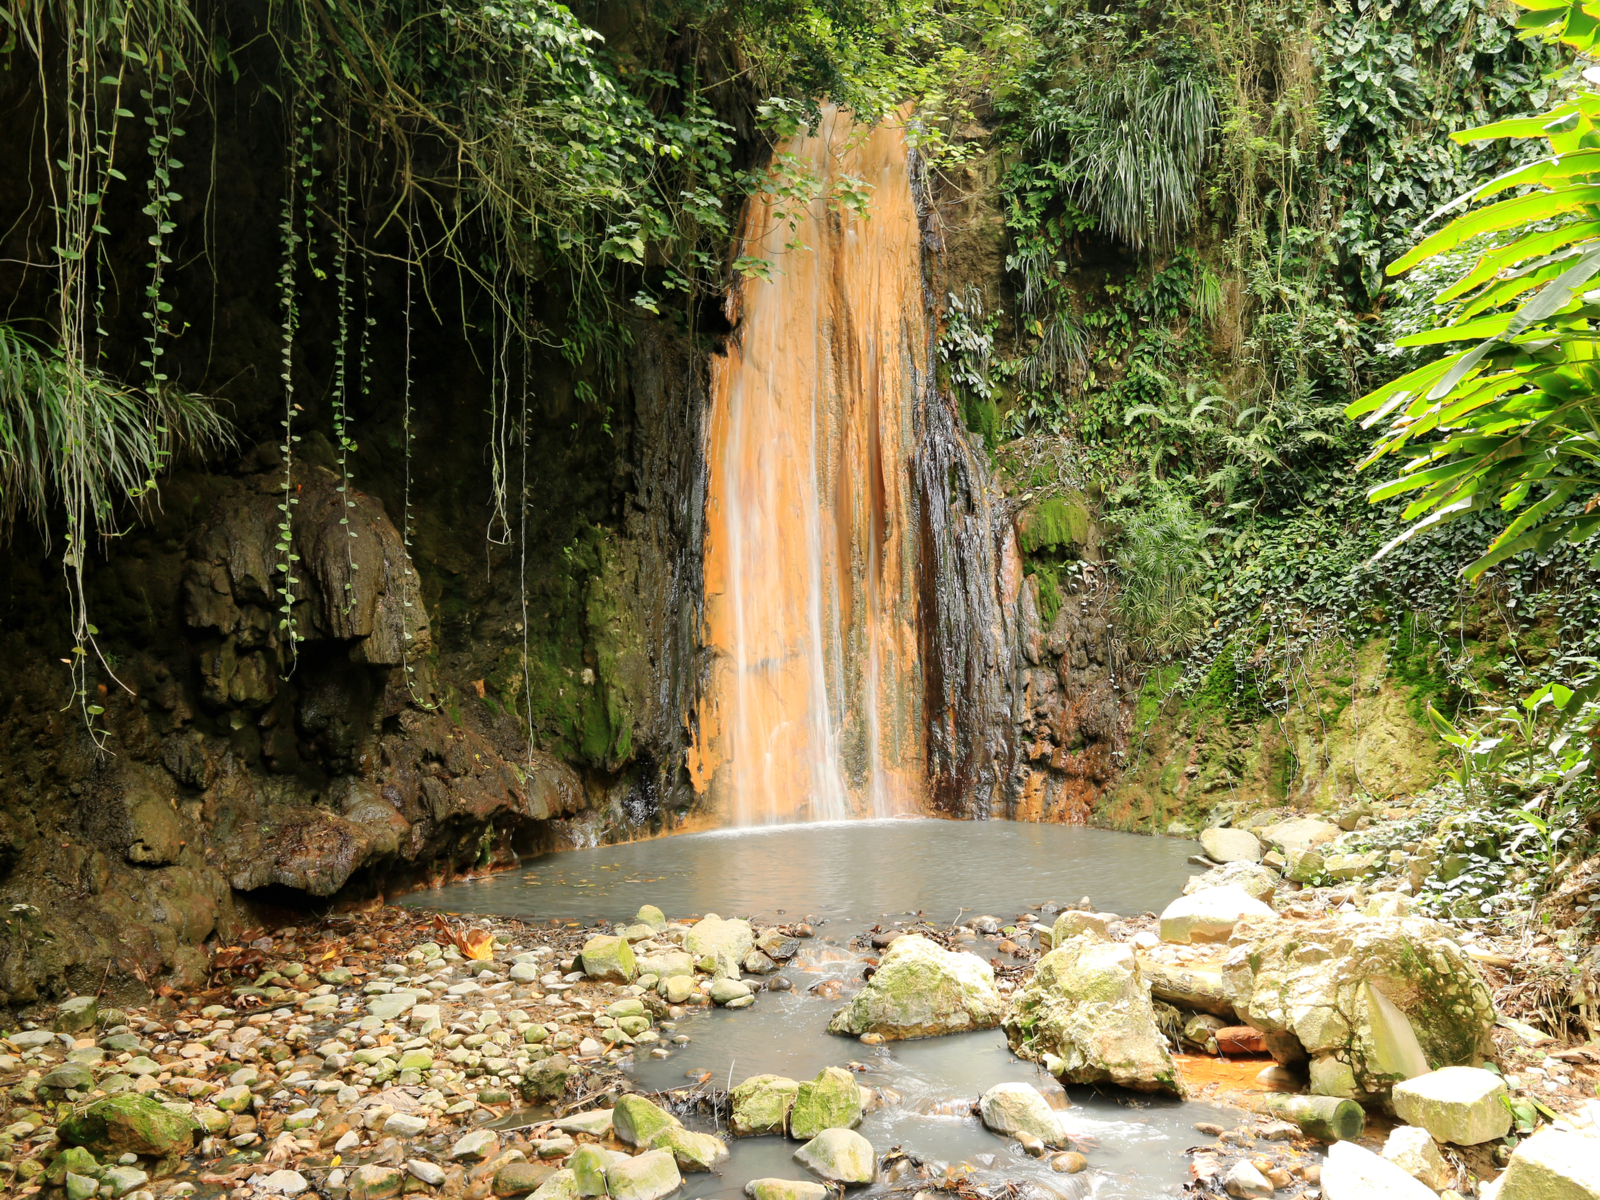 One of the best things to do in Saint Lucia, the Diamond Falls Botanical Gardens